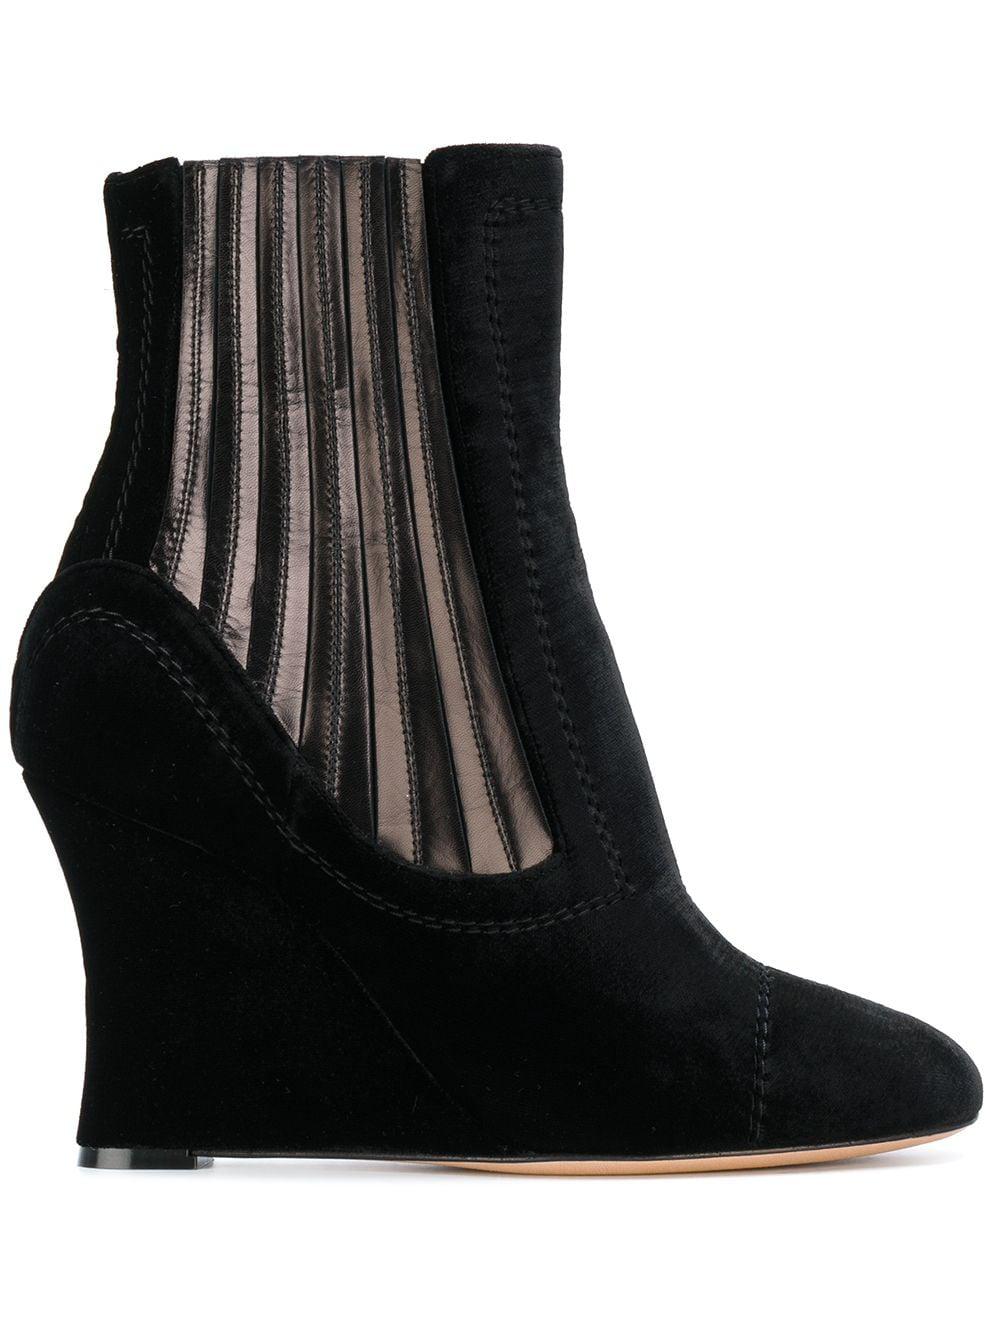 metallic panelled wedge ankle boots by ALCHIMIA DI BALLIN